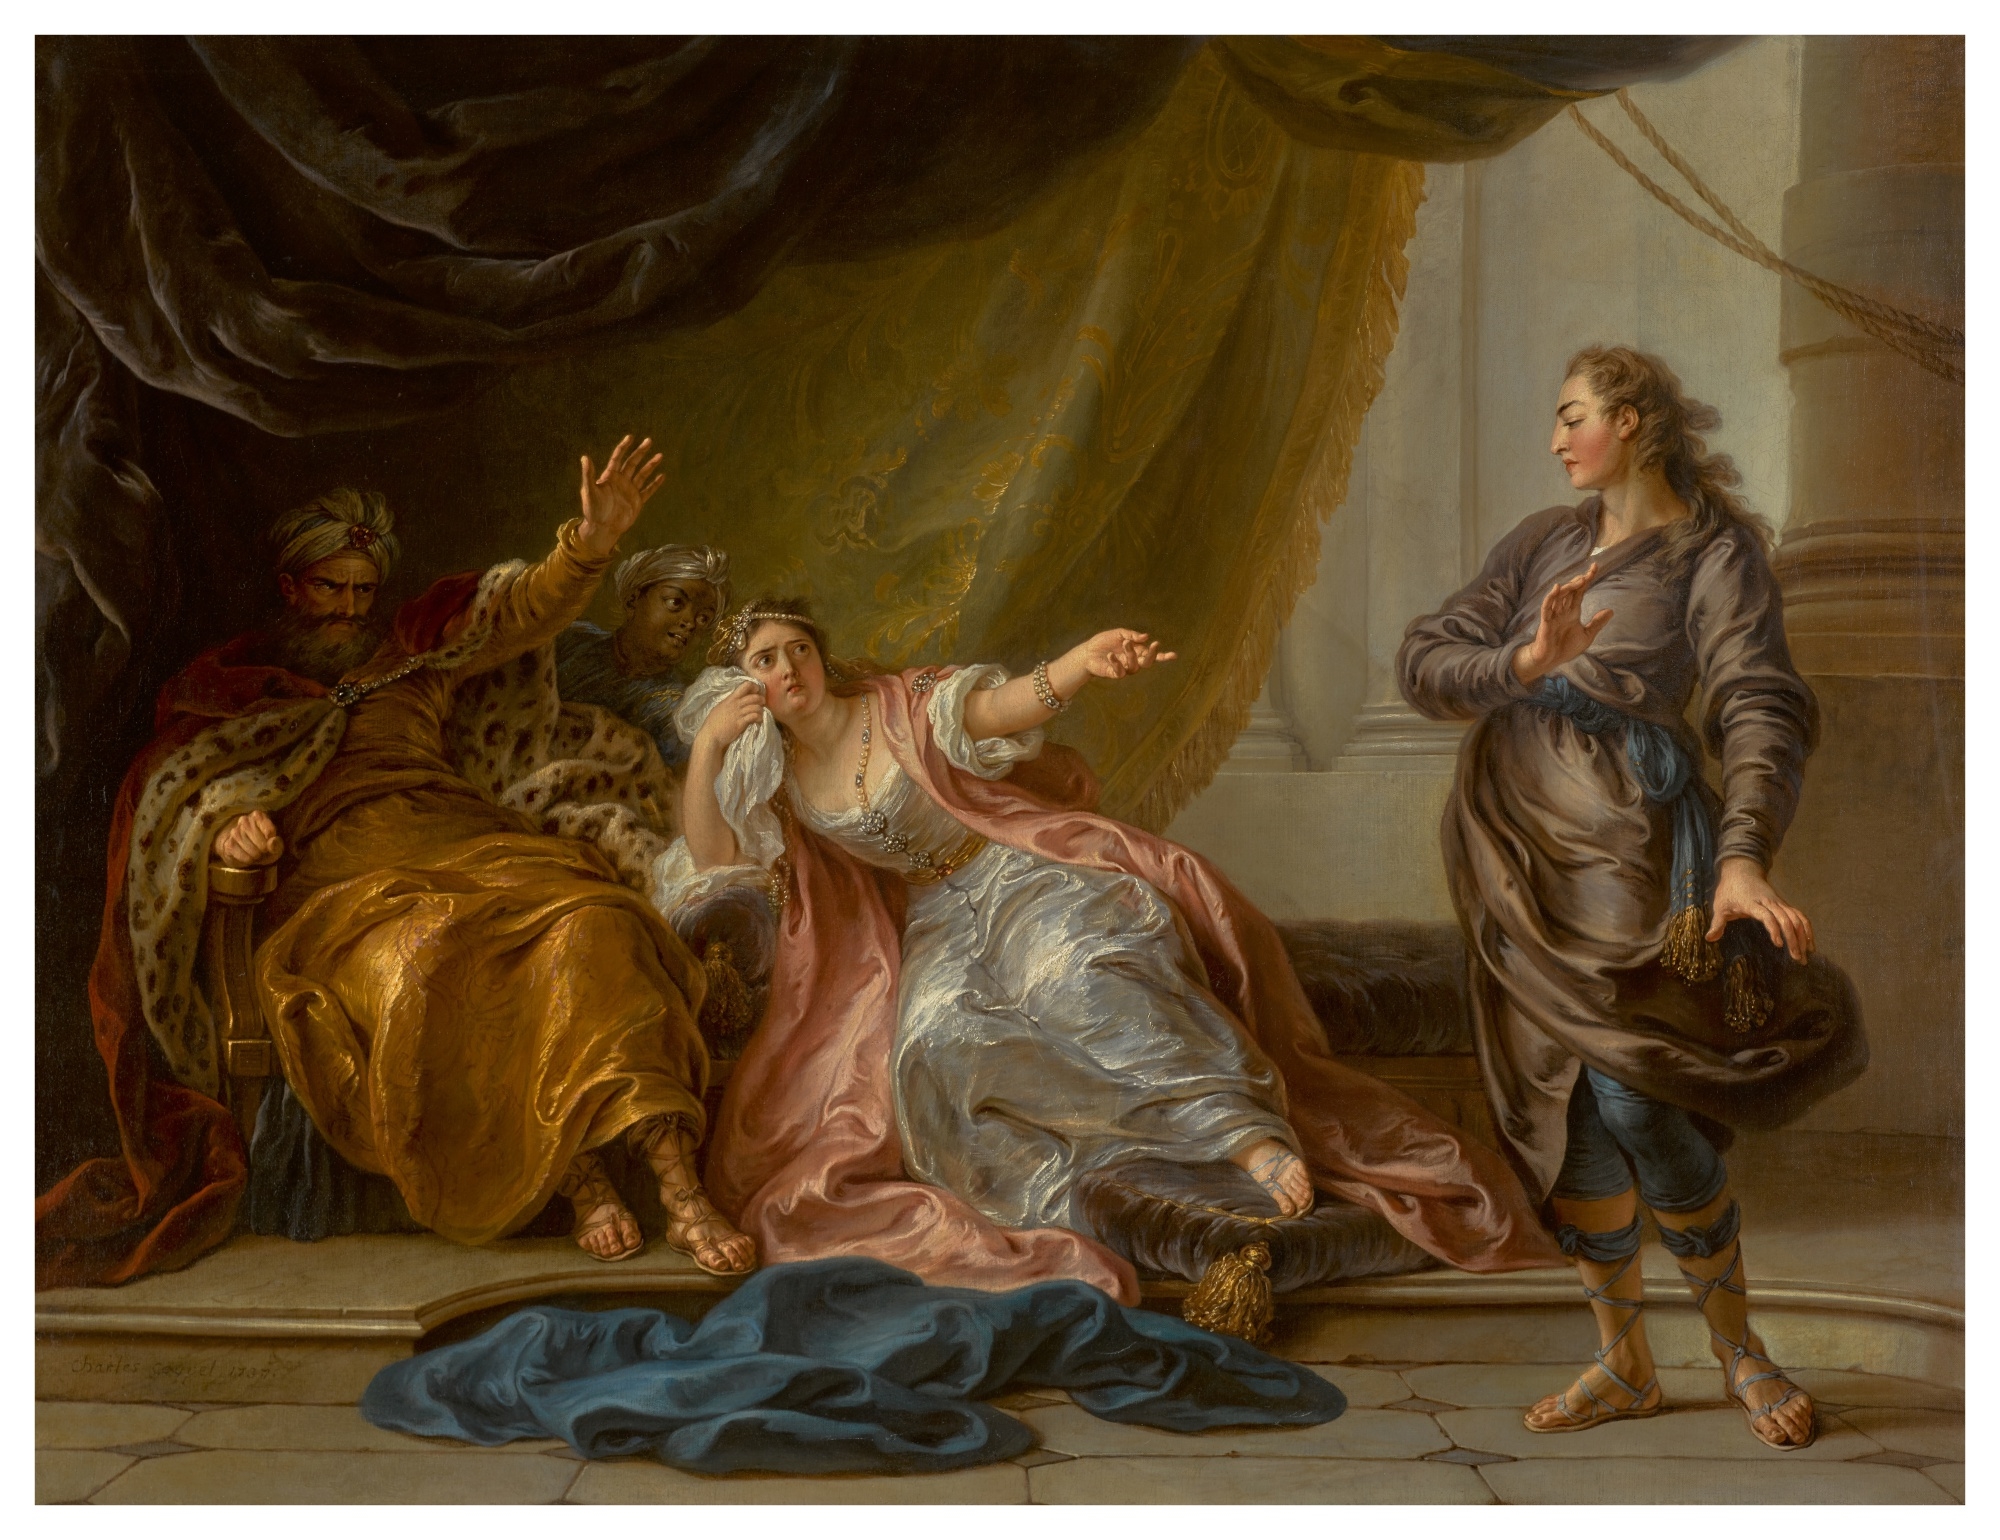 Artwork by Charles-Antoine Coypel, Joseph Accused by Potiphar's Wife, Made of oil on canvas canvas